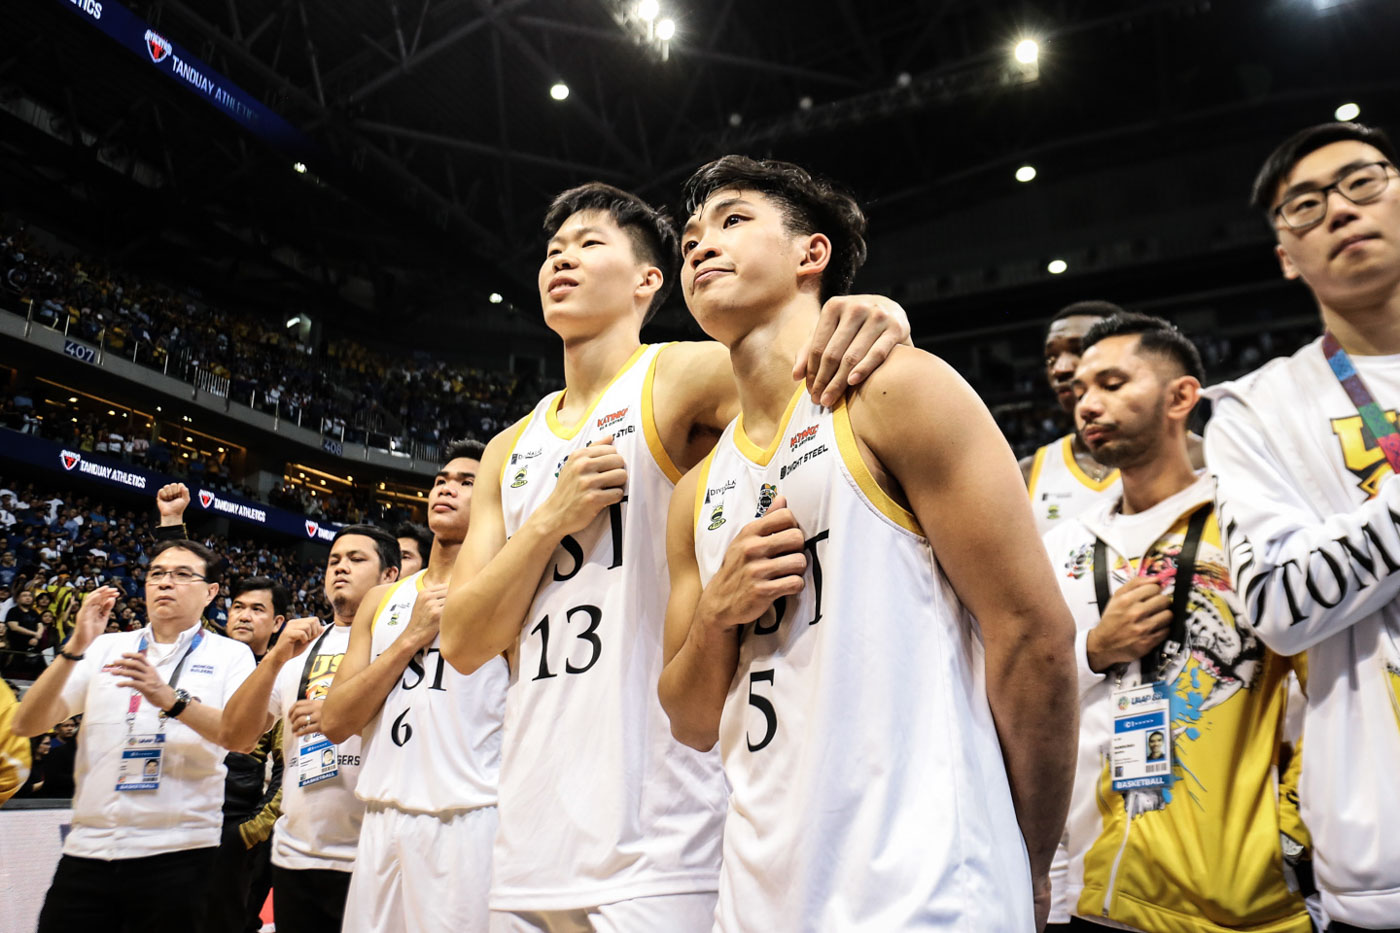 ust growling tigers jersey